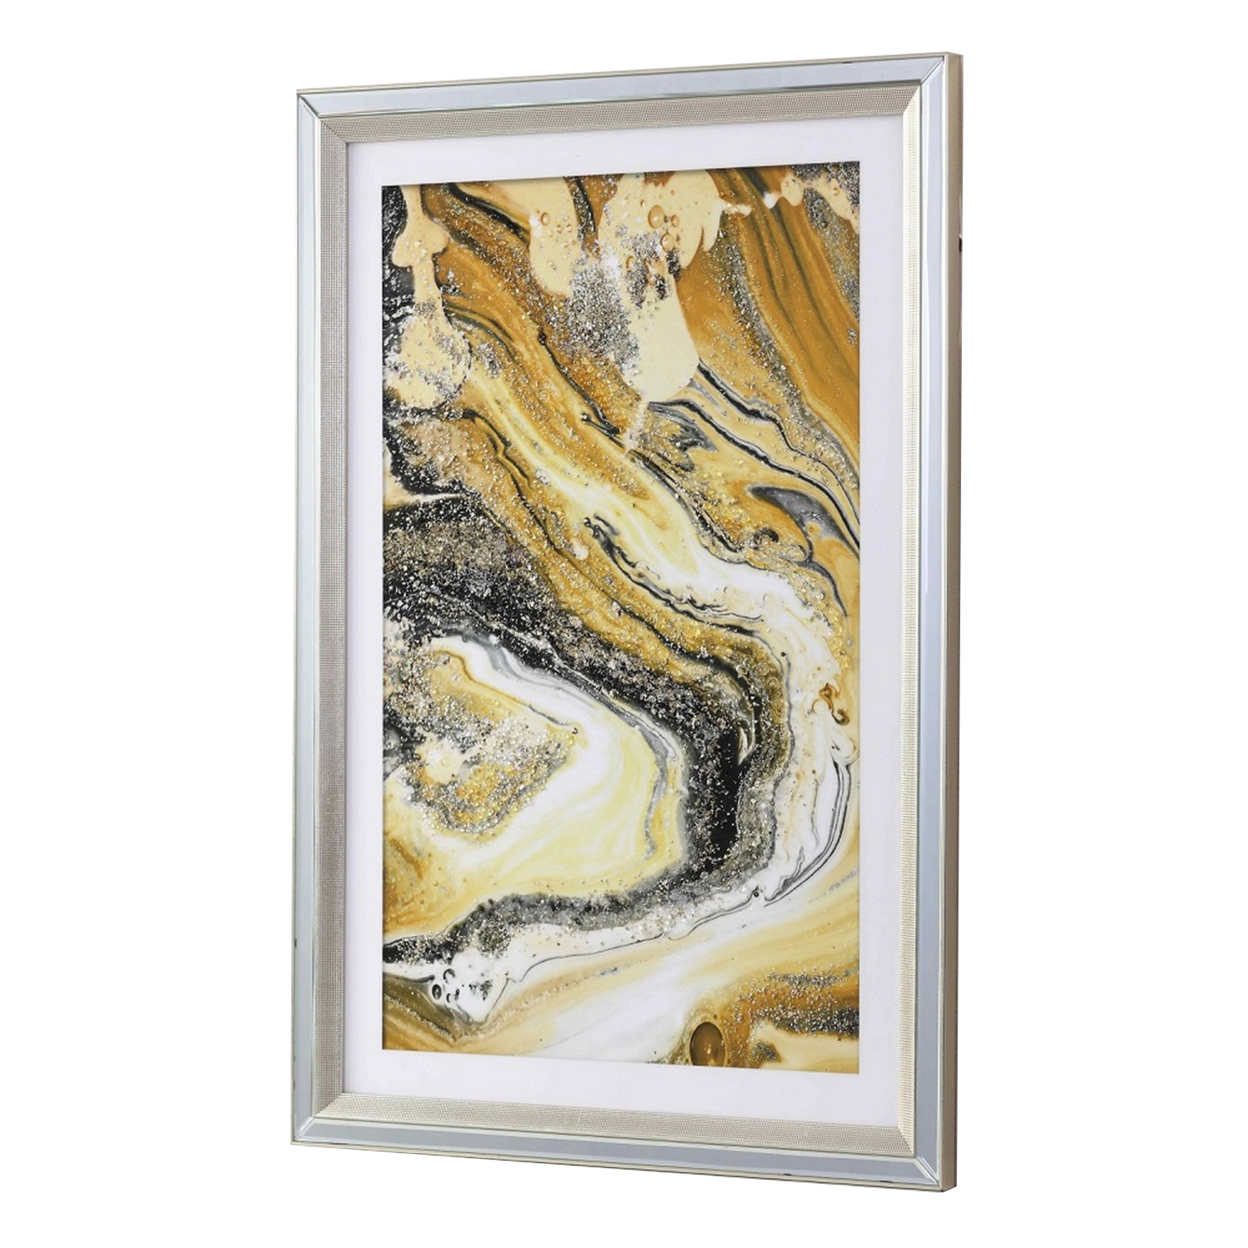 Wall Art With Abstract Design And Acrylic Mirror Frame, Silver And Yellow- Saltoro Sherpi